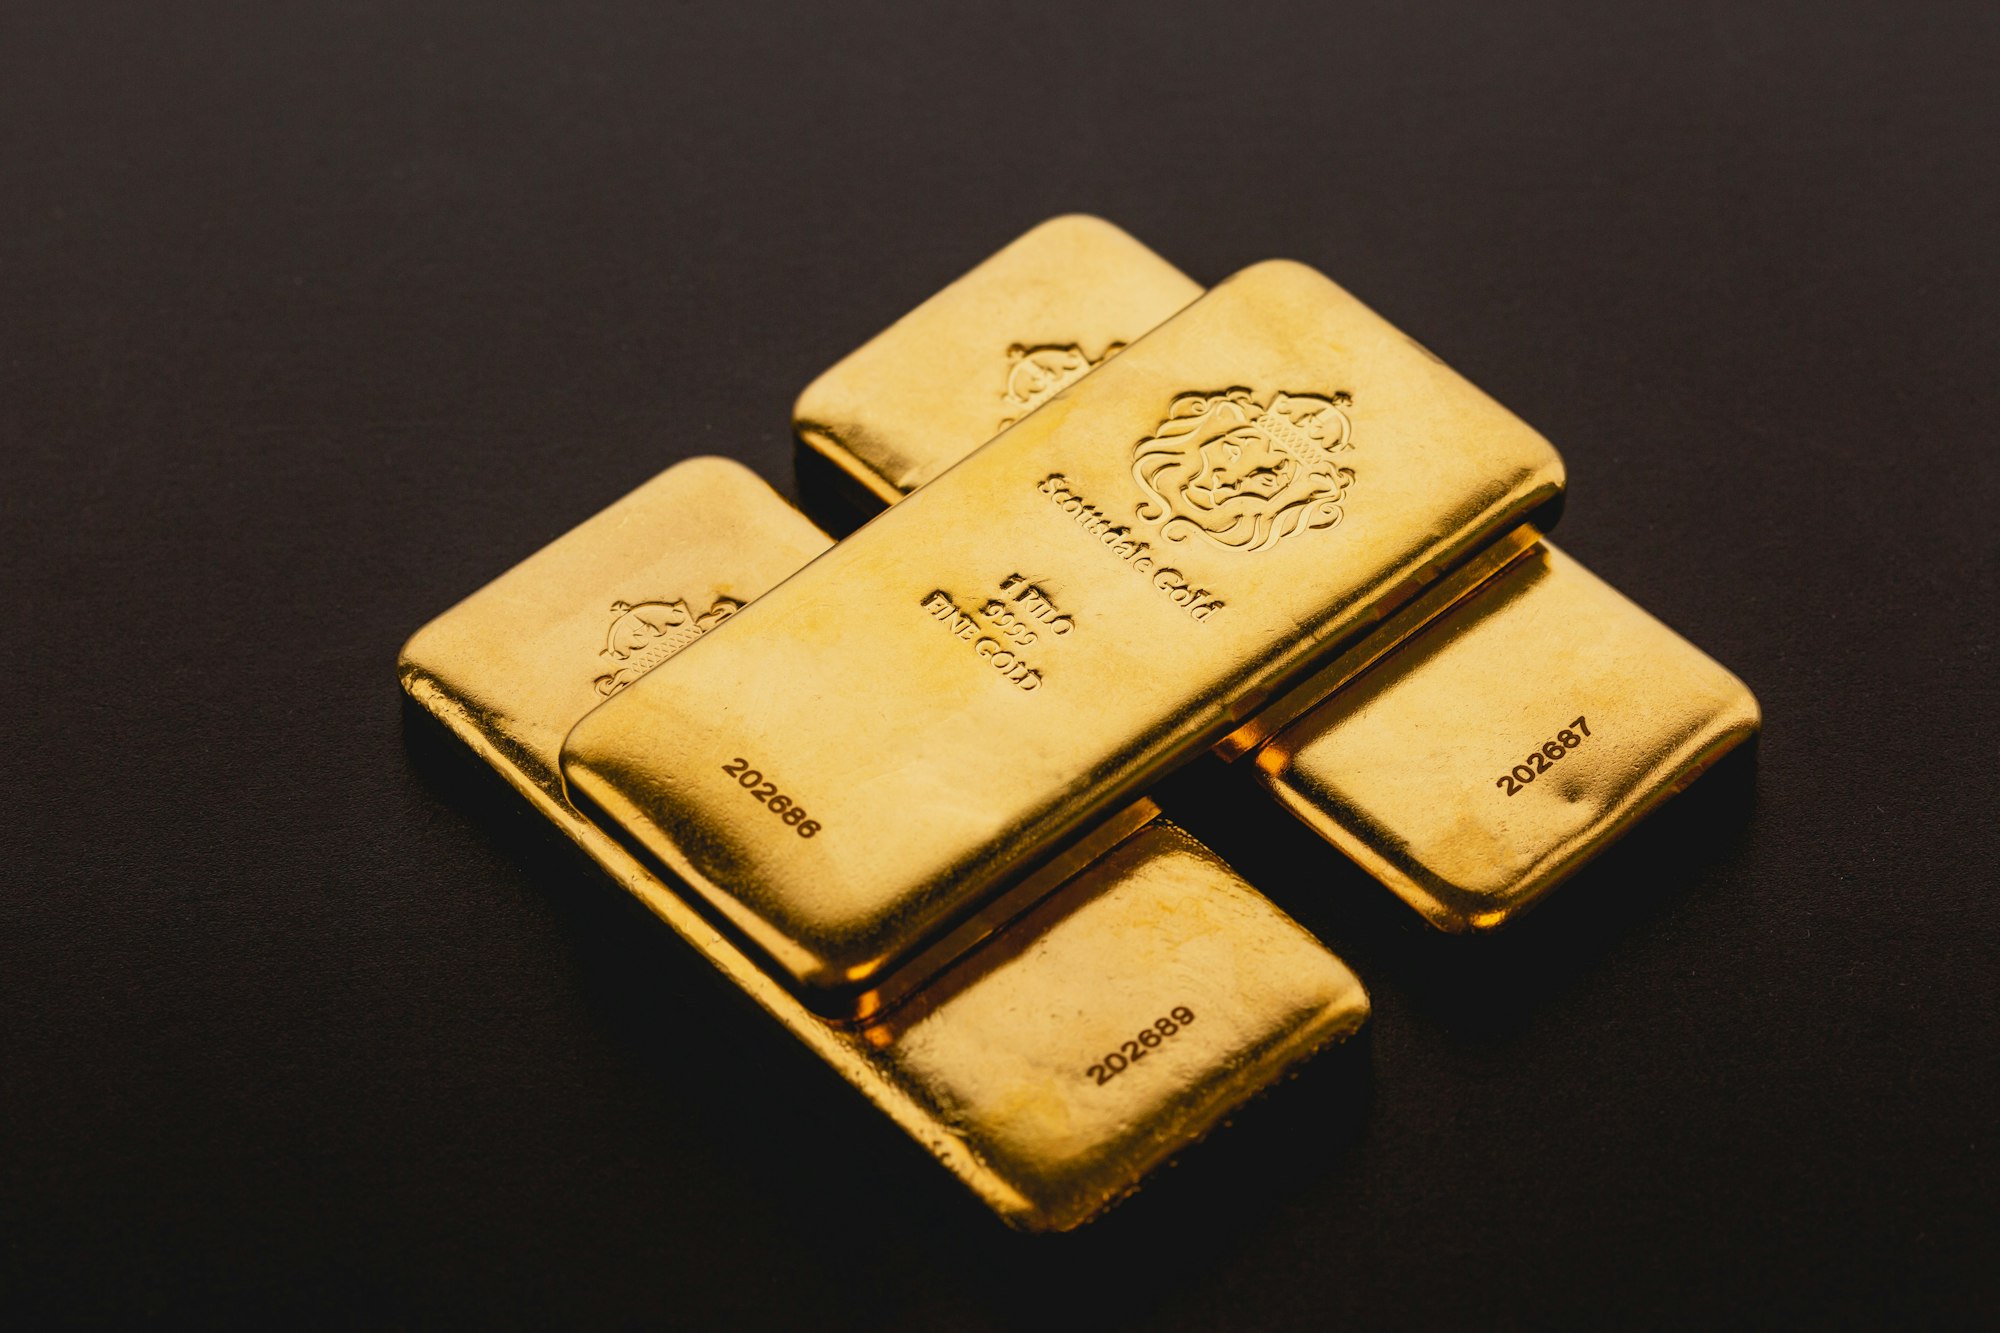 Top 5 Ways in How to invest in Gold